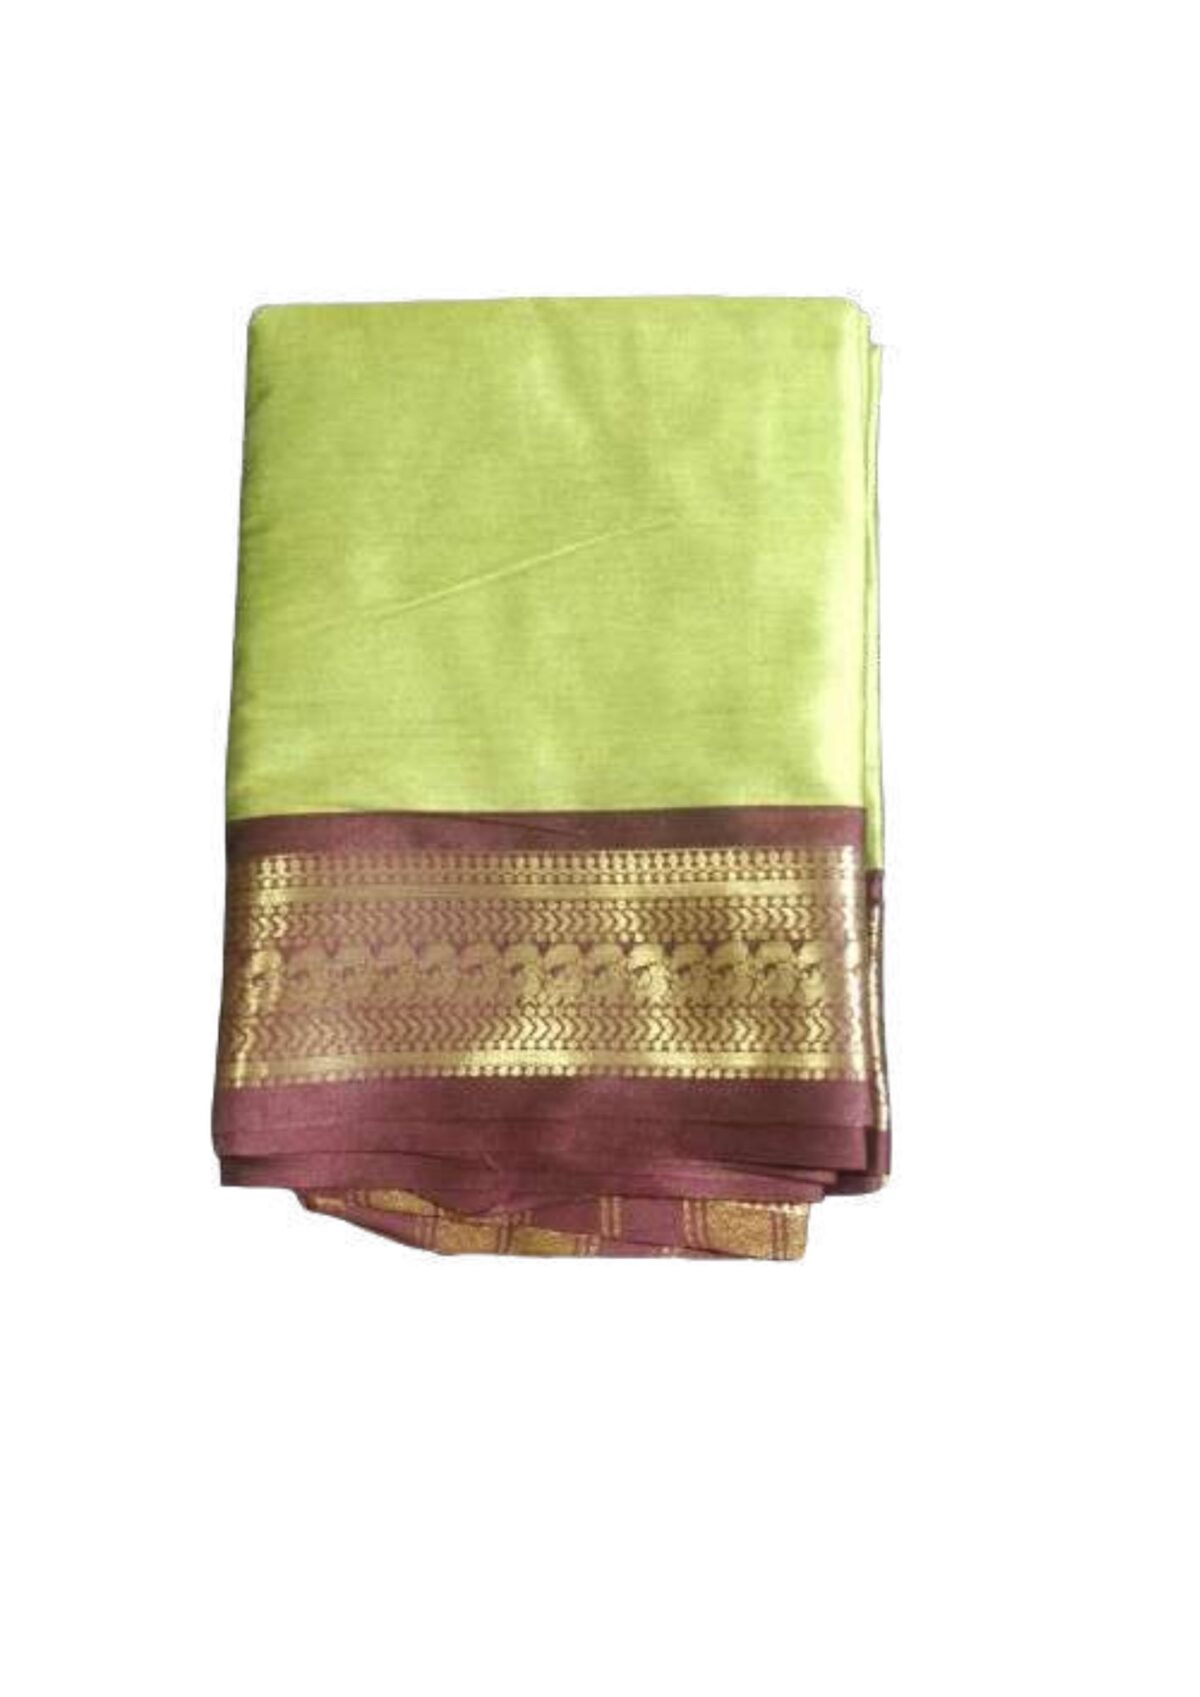 It seems like you're looking for information about Aagyeyi Pretty Sarees in the color green. However, as of my last knowledge update in January 2022, I don't have specific information about Aagyeyi Pretty Sarees or their collections. Keep in mind that my information might be outdated, and I recommend checking the latest sources, such as the official website of Aagyeyi or other reliable online retailers, for the most recent and accurate information on their saree collections, including green-colored sarees.